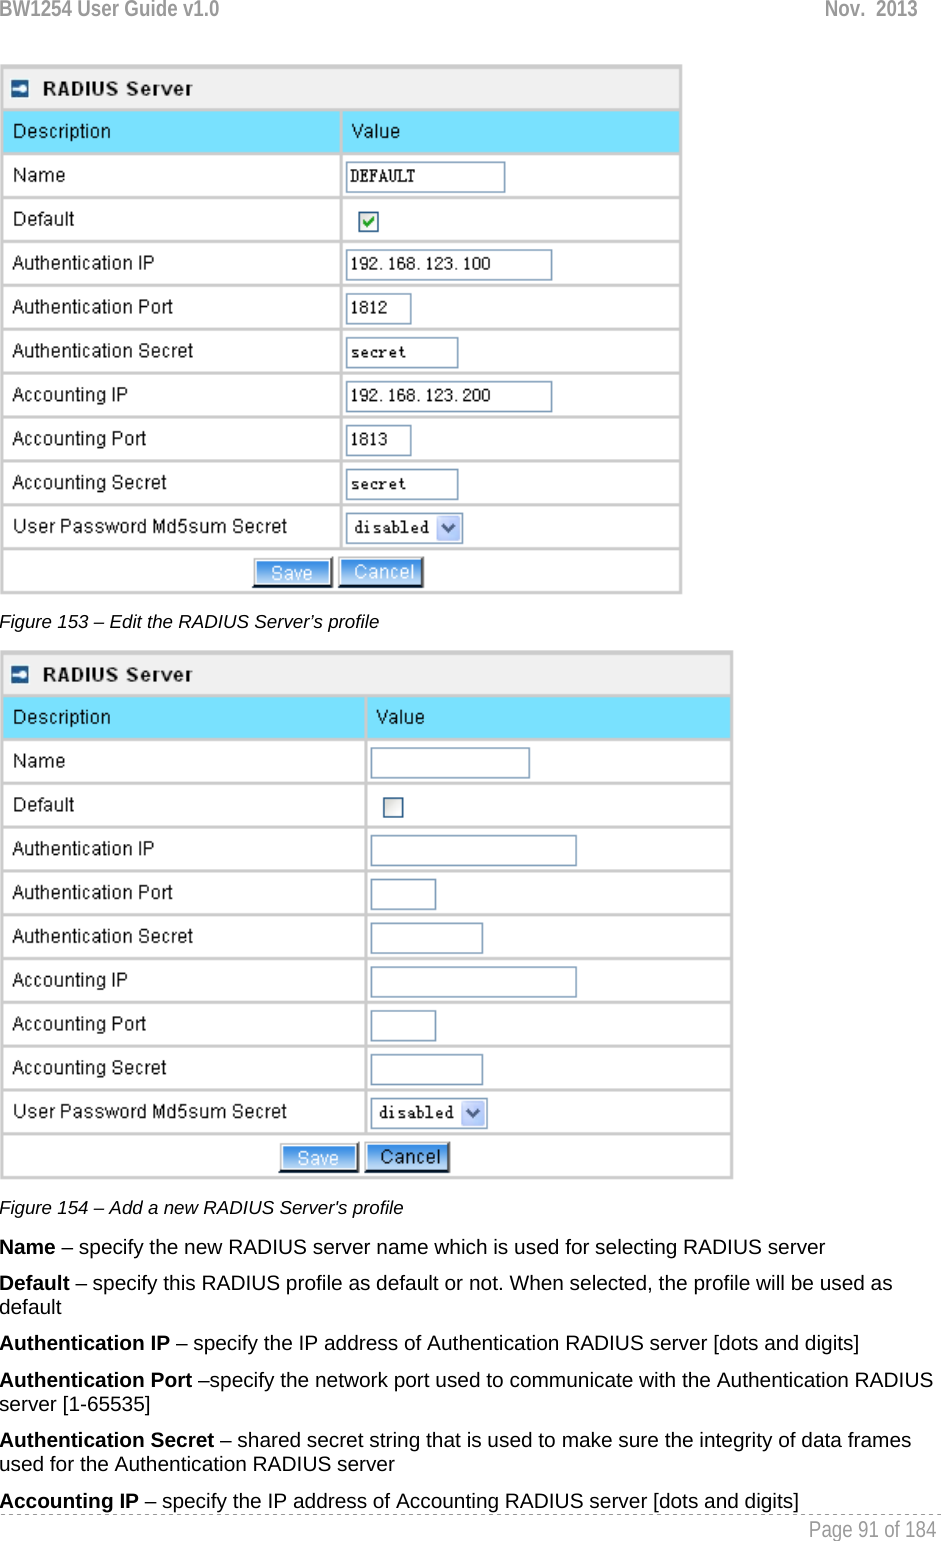 BW1254 User Guide v1.0  Nov.  2013     Page 91 of 184    Figure 153 – Edit the RADIUS Server’s profile  Figure 154 – Add a new RADIUS Server&apos;s profile Name – specify the new RADIUS server name which is used for selecting RADIUS server Default – specify this RADIUS profile as default or not. When selected, the profile will be used as default Authentication IP – specify the IP address of Authentication RADIUS server [dots and digits] Authentication Port –specify the network port used to communicate with the Authentication RADIUS server [1-65535] Authentication Secret – shared secret string that is used to make sure the integrity of data frames used for the Authentication RADIUS server Accounting IP – specify the IP address of Accounting RADIUS server [dots and digits] 